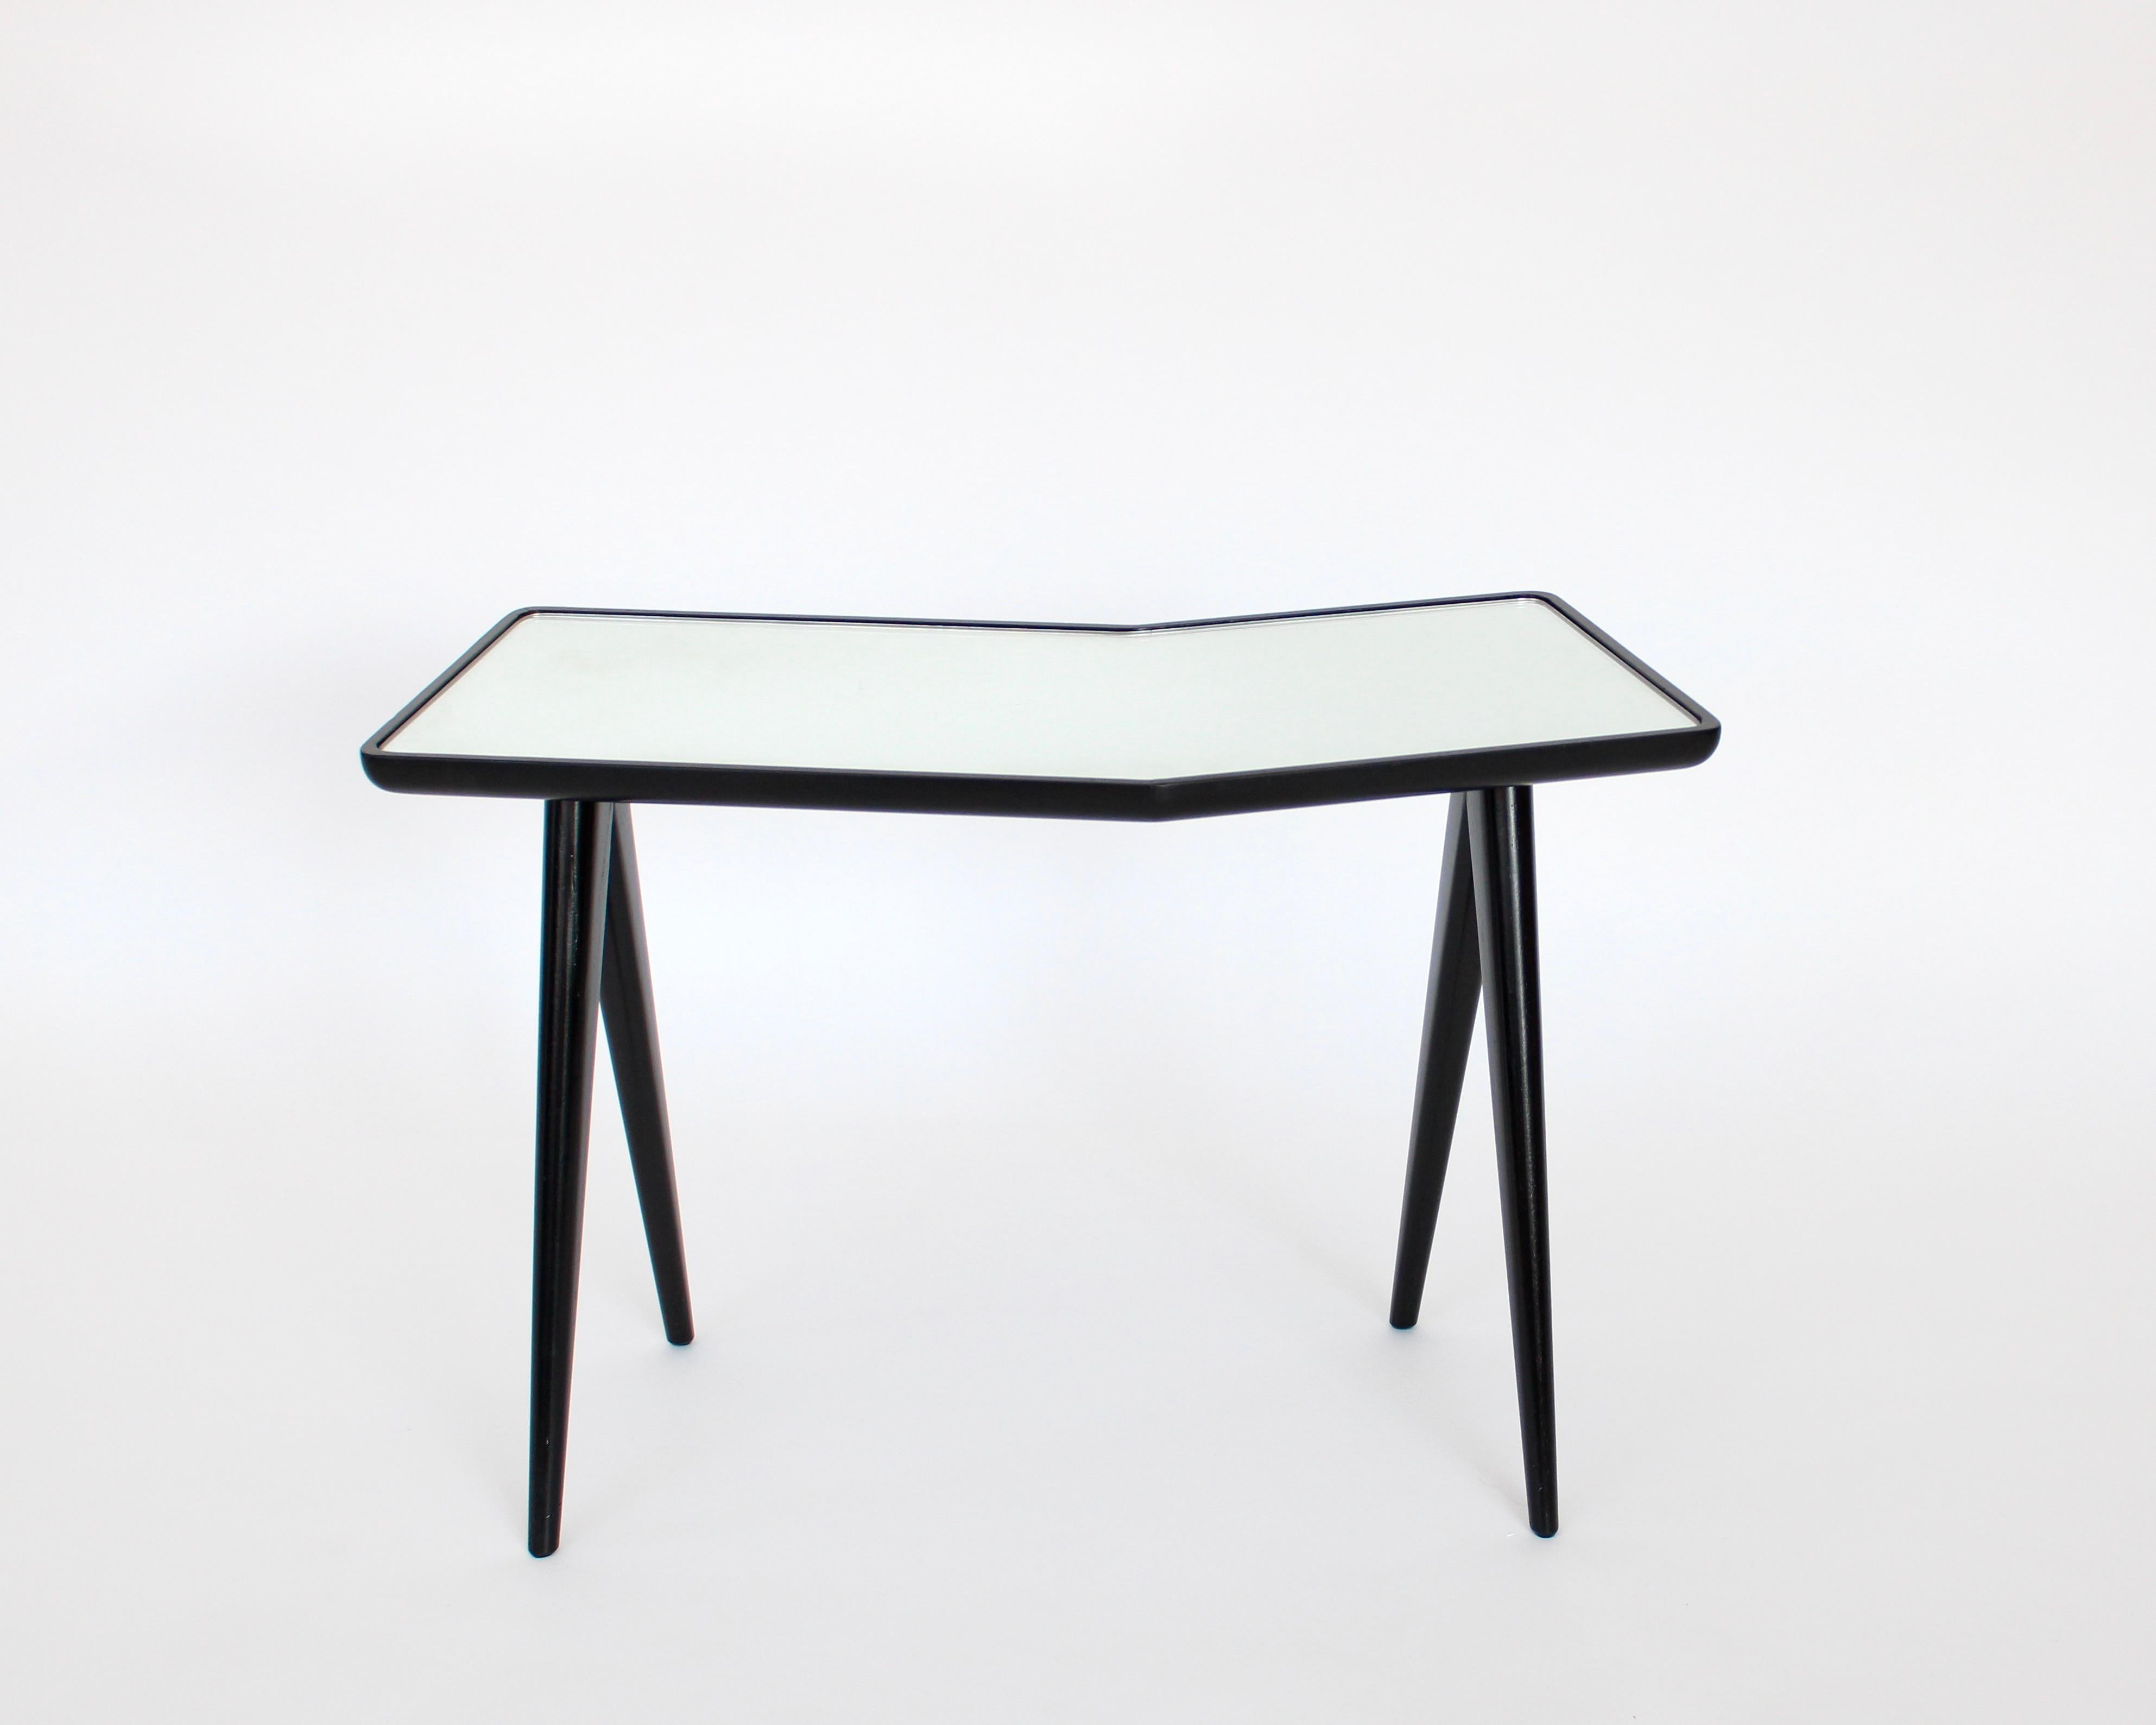 Mid-20th Century Gio Ponti Pair of Black Side Tables Mirrored Glass Tops Asymmetrical Forms